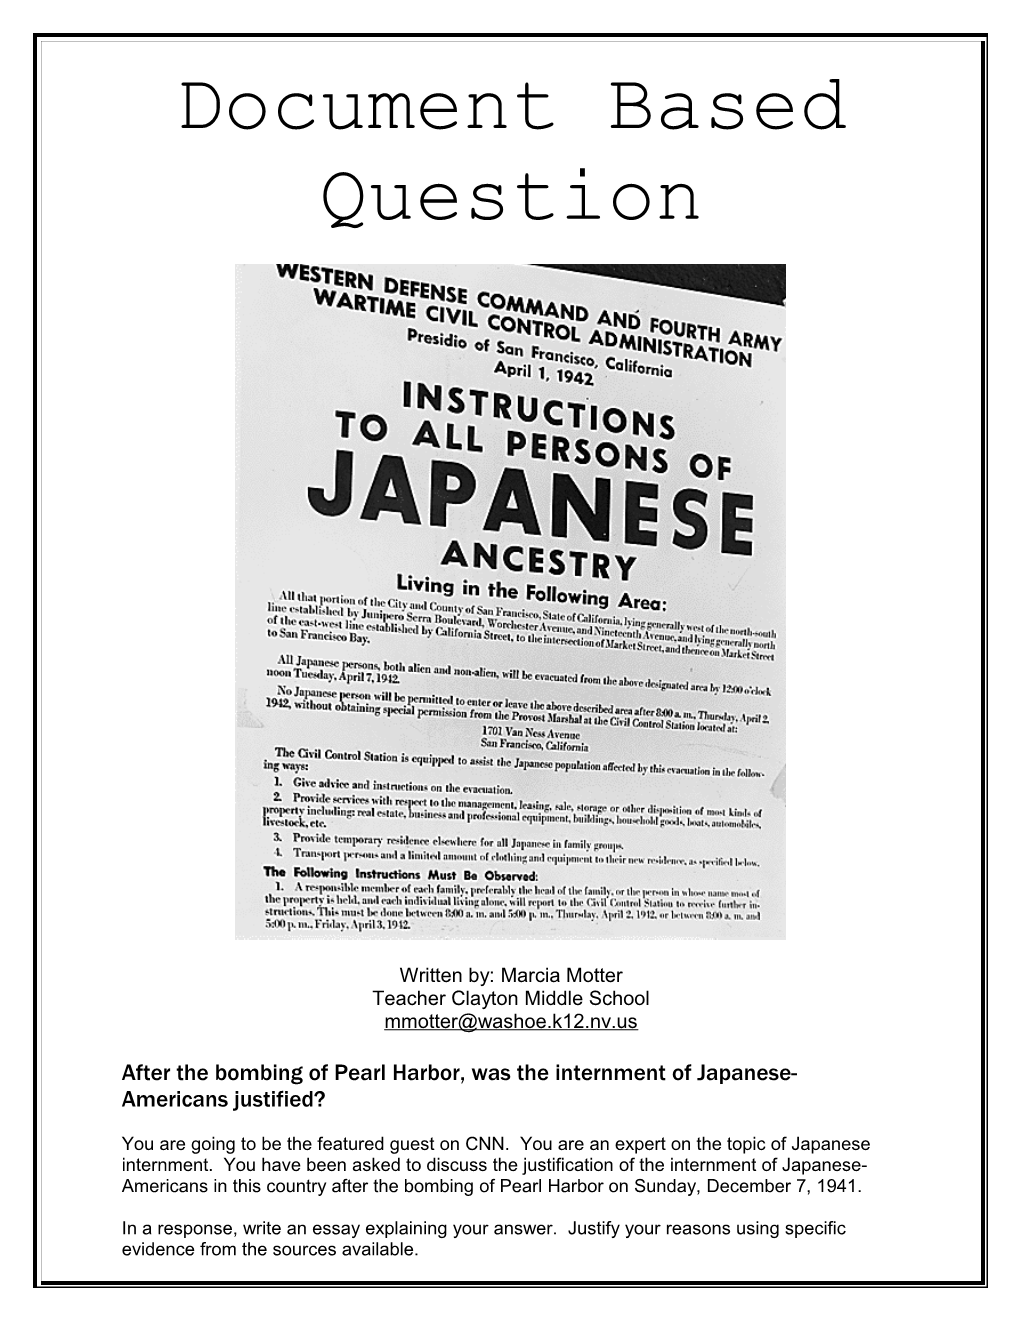 After the Bombing of Pearl Harbor, Was the Internment of Japanese Americans Justified